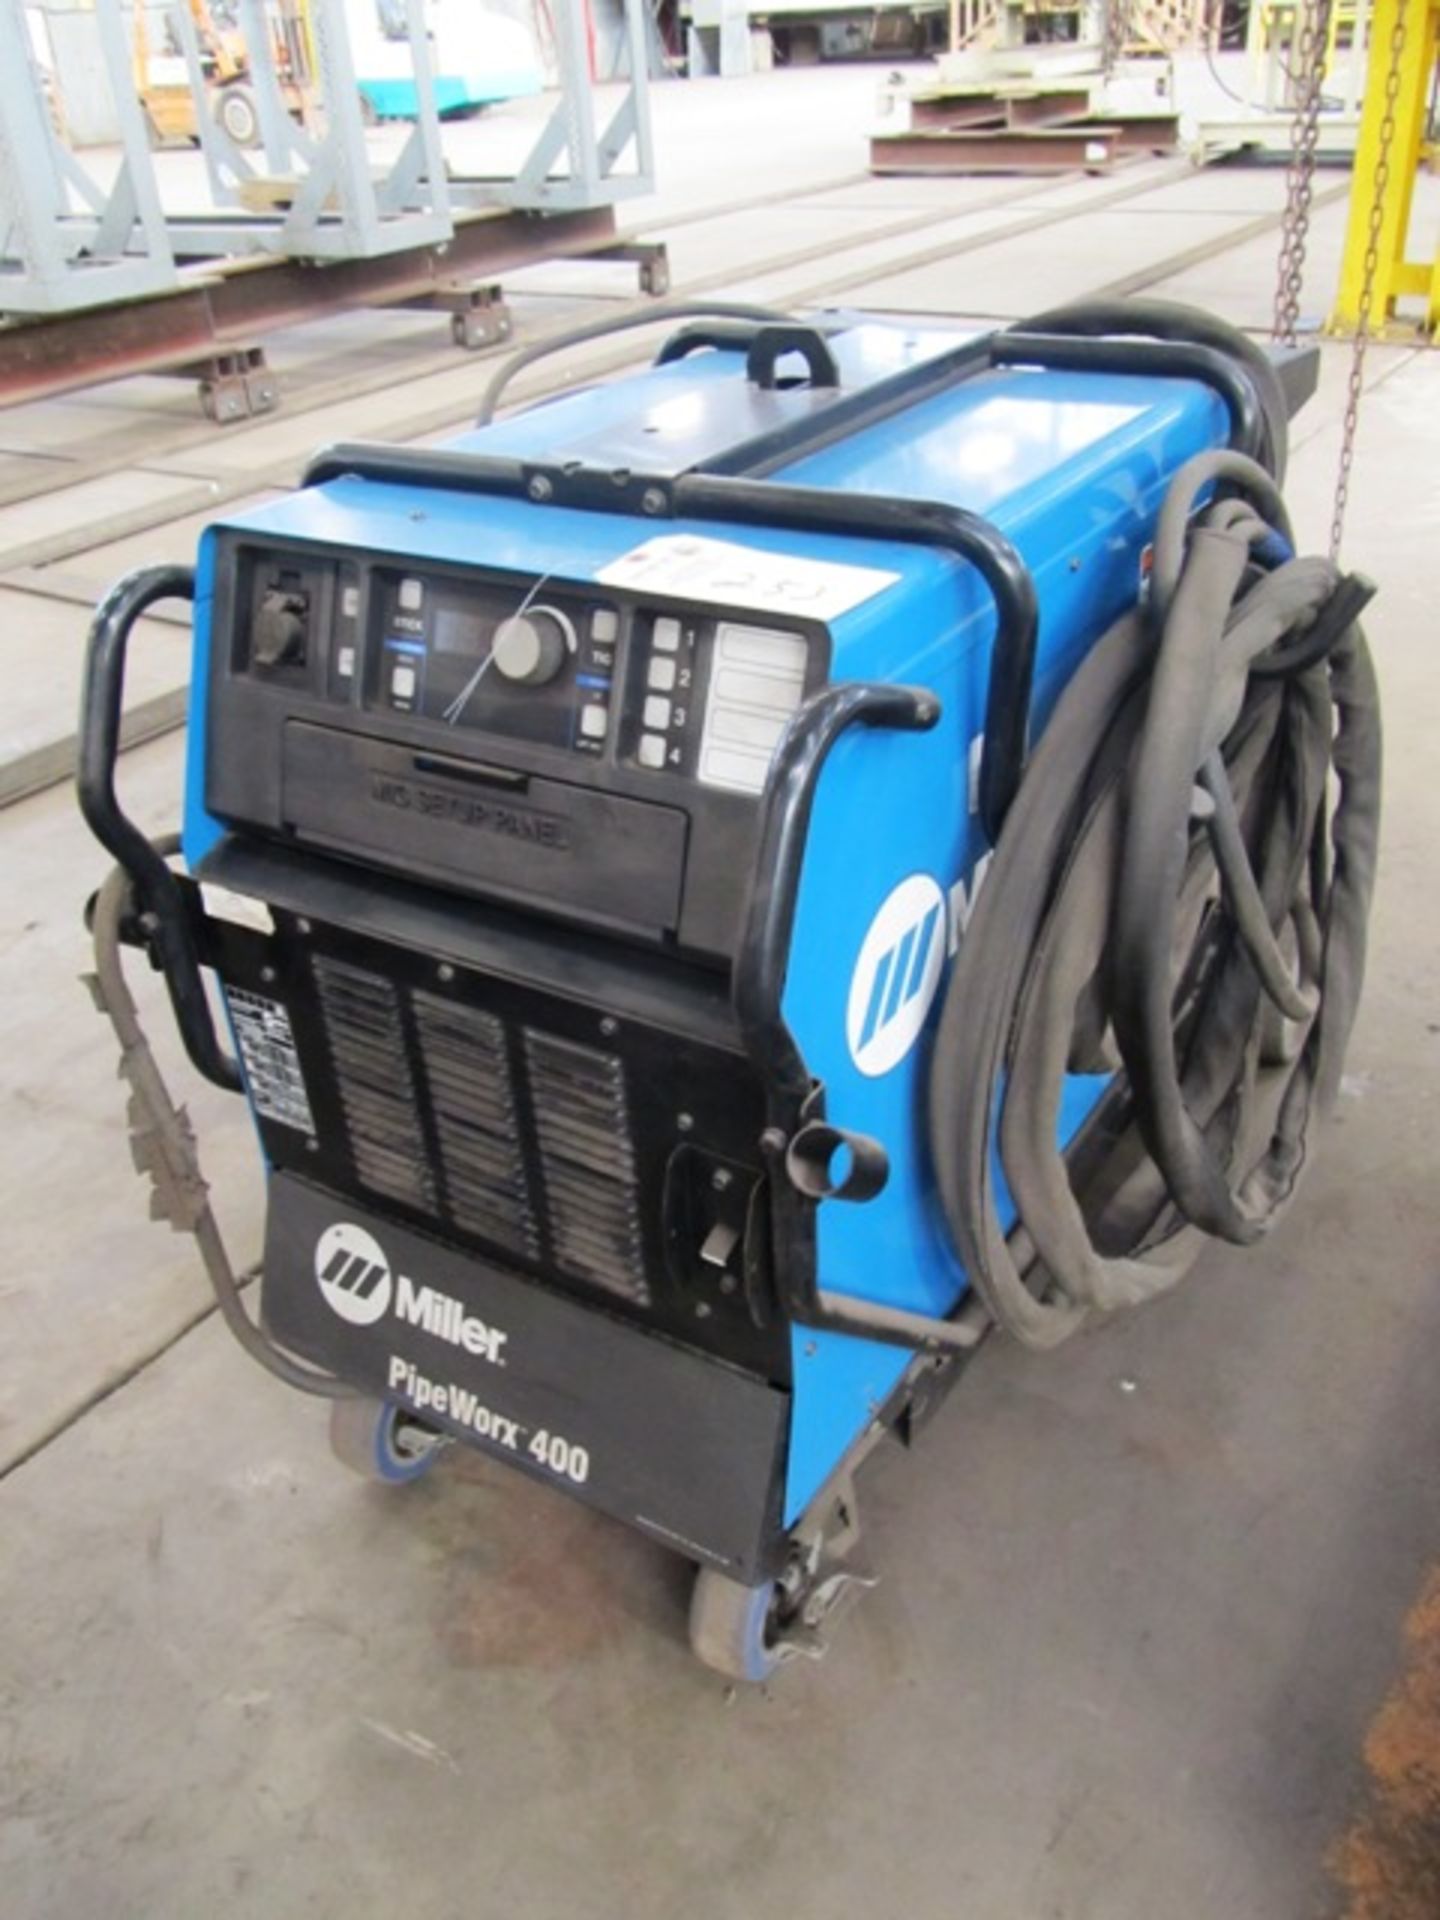 Miller PipeWorx 400 Portable Mig Welder with Miller PipeWorx Dual Wire Feeder, sn:MD130014G